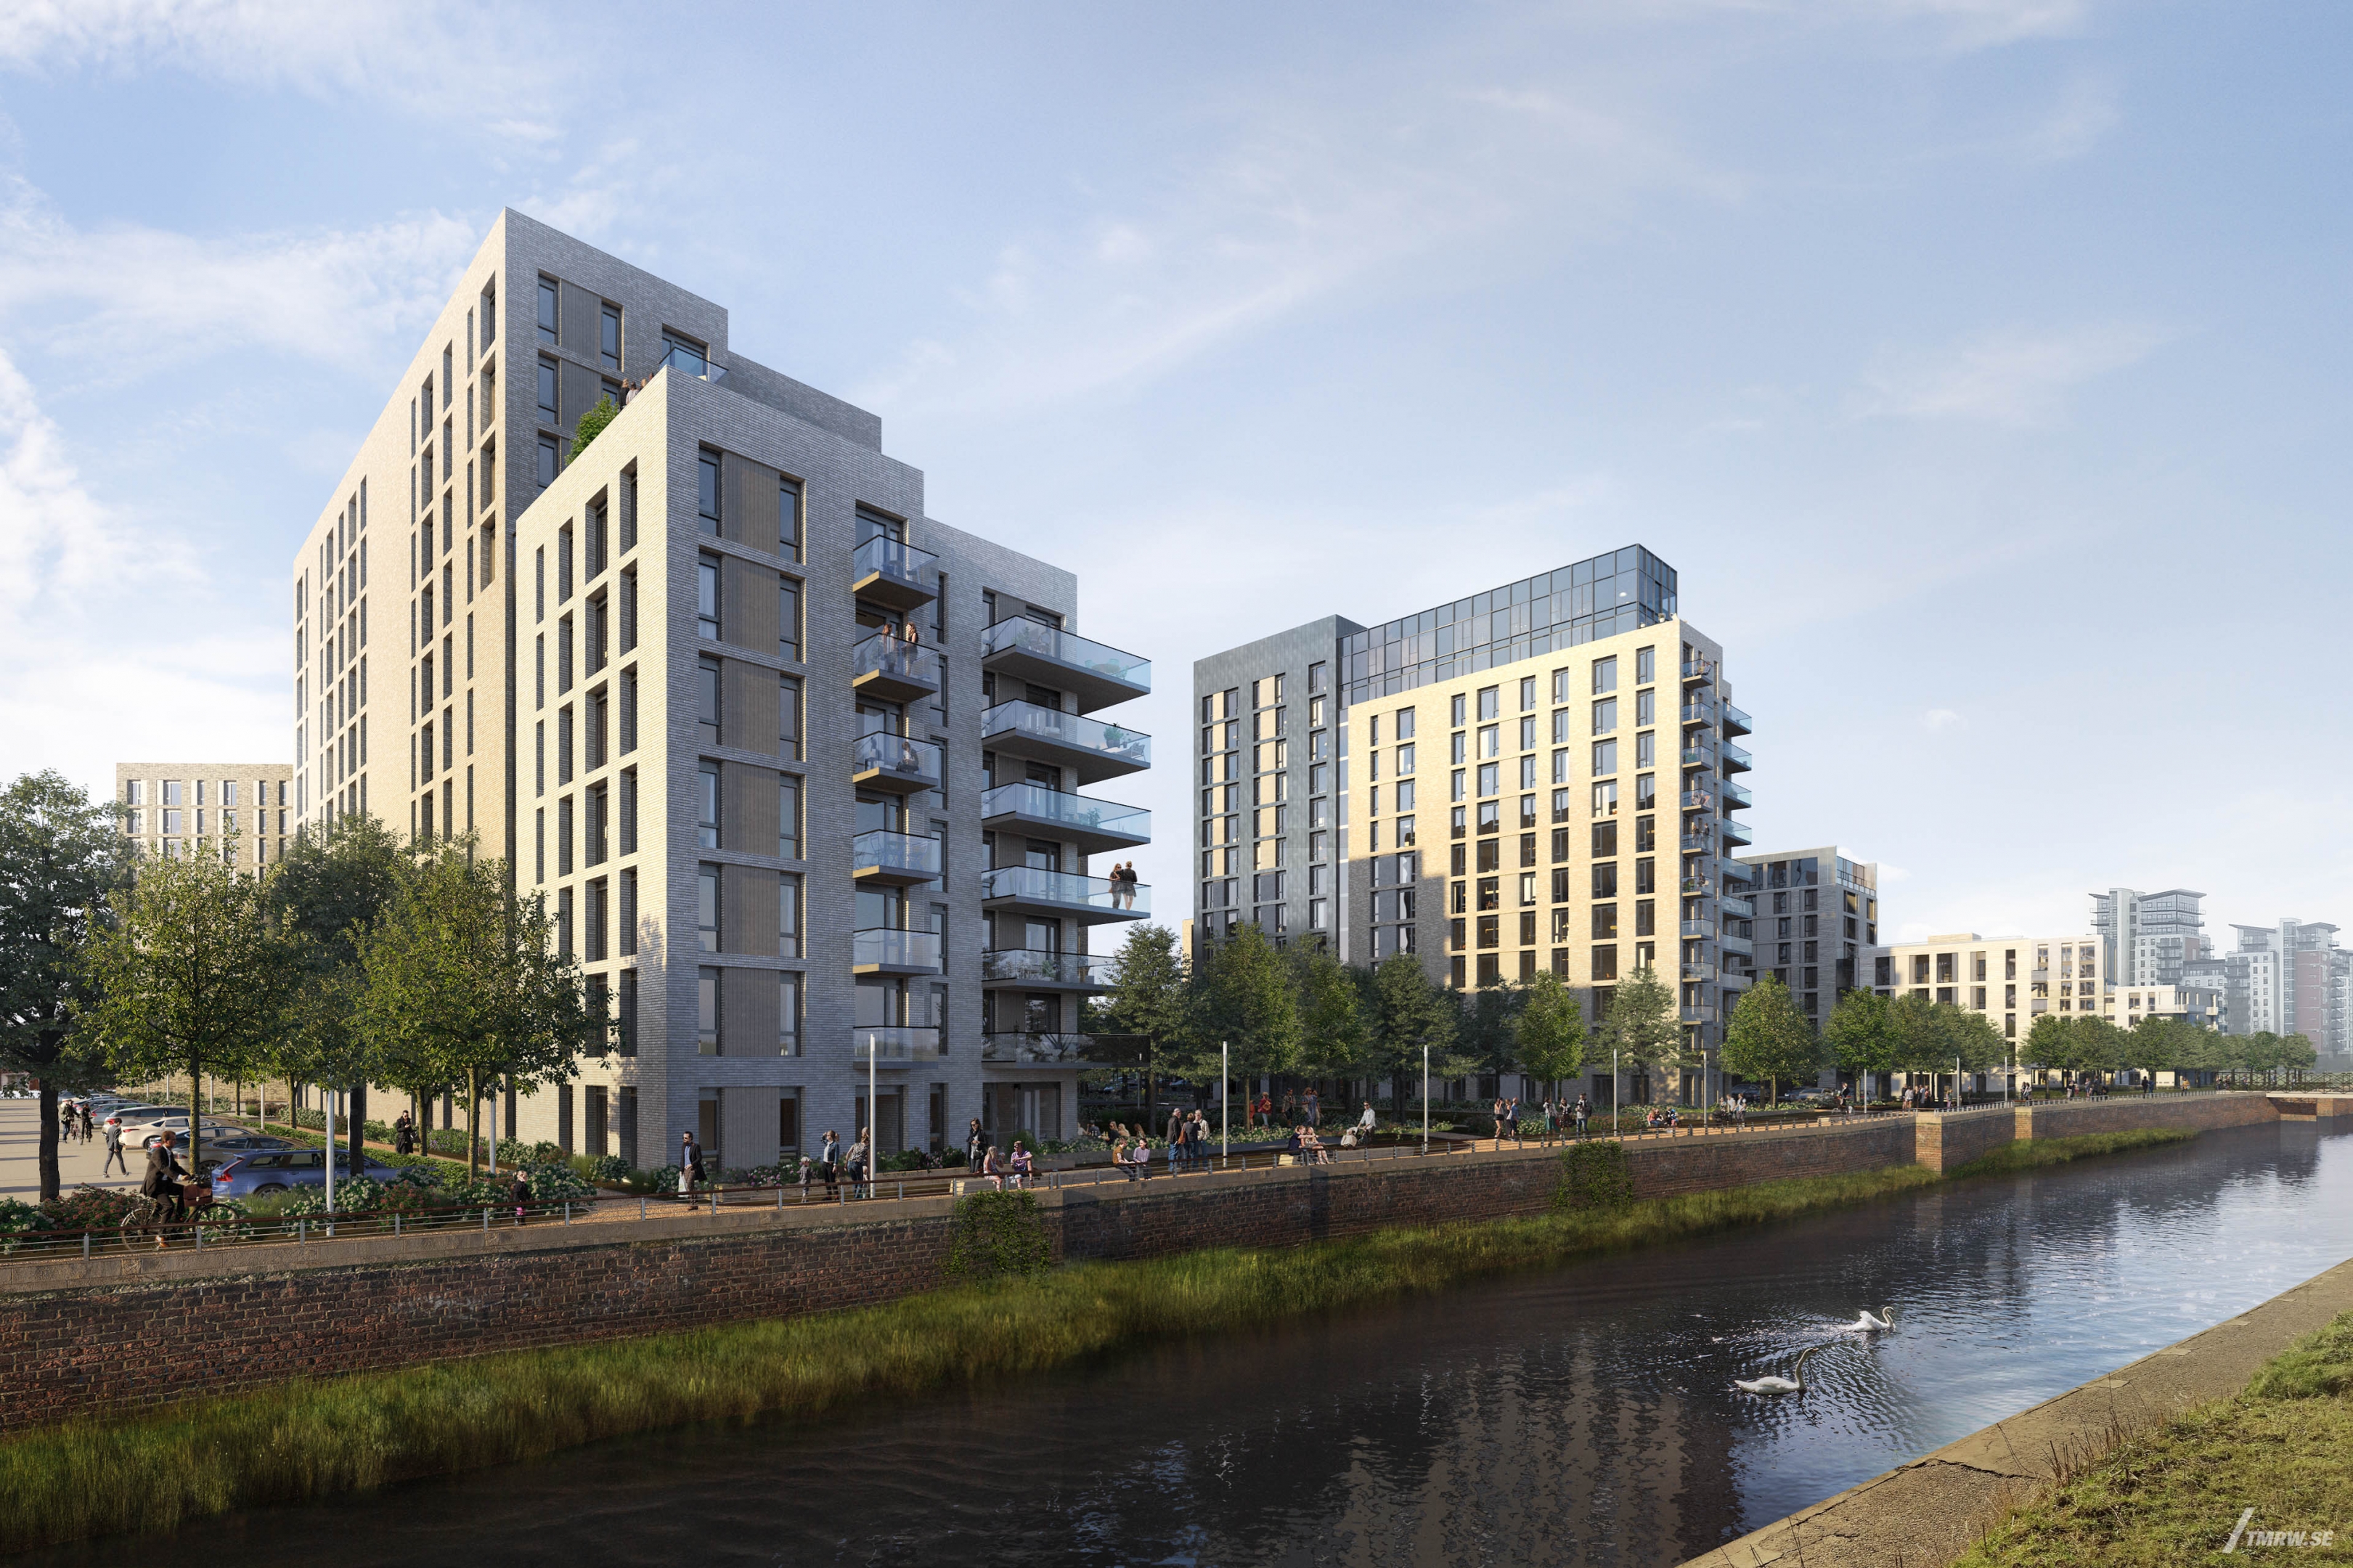 Architectural visualization of Leeds for CallisonRTKL, residential buildings, two swans swimming in channel